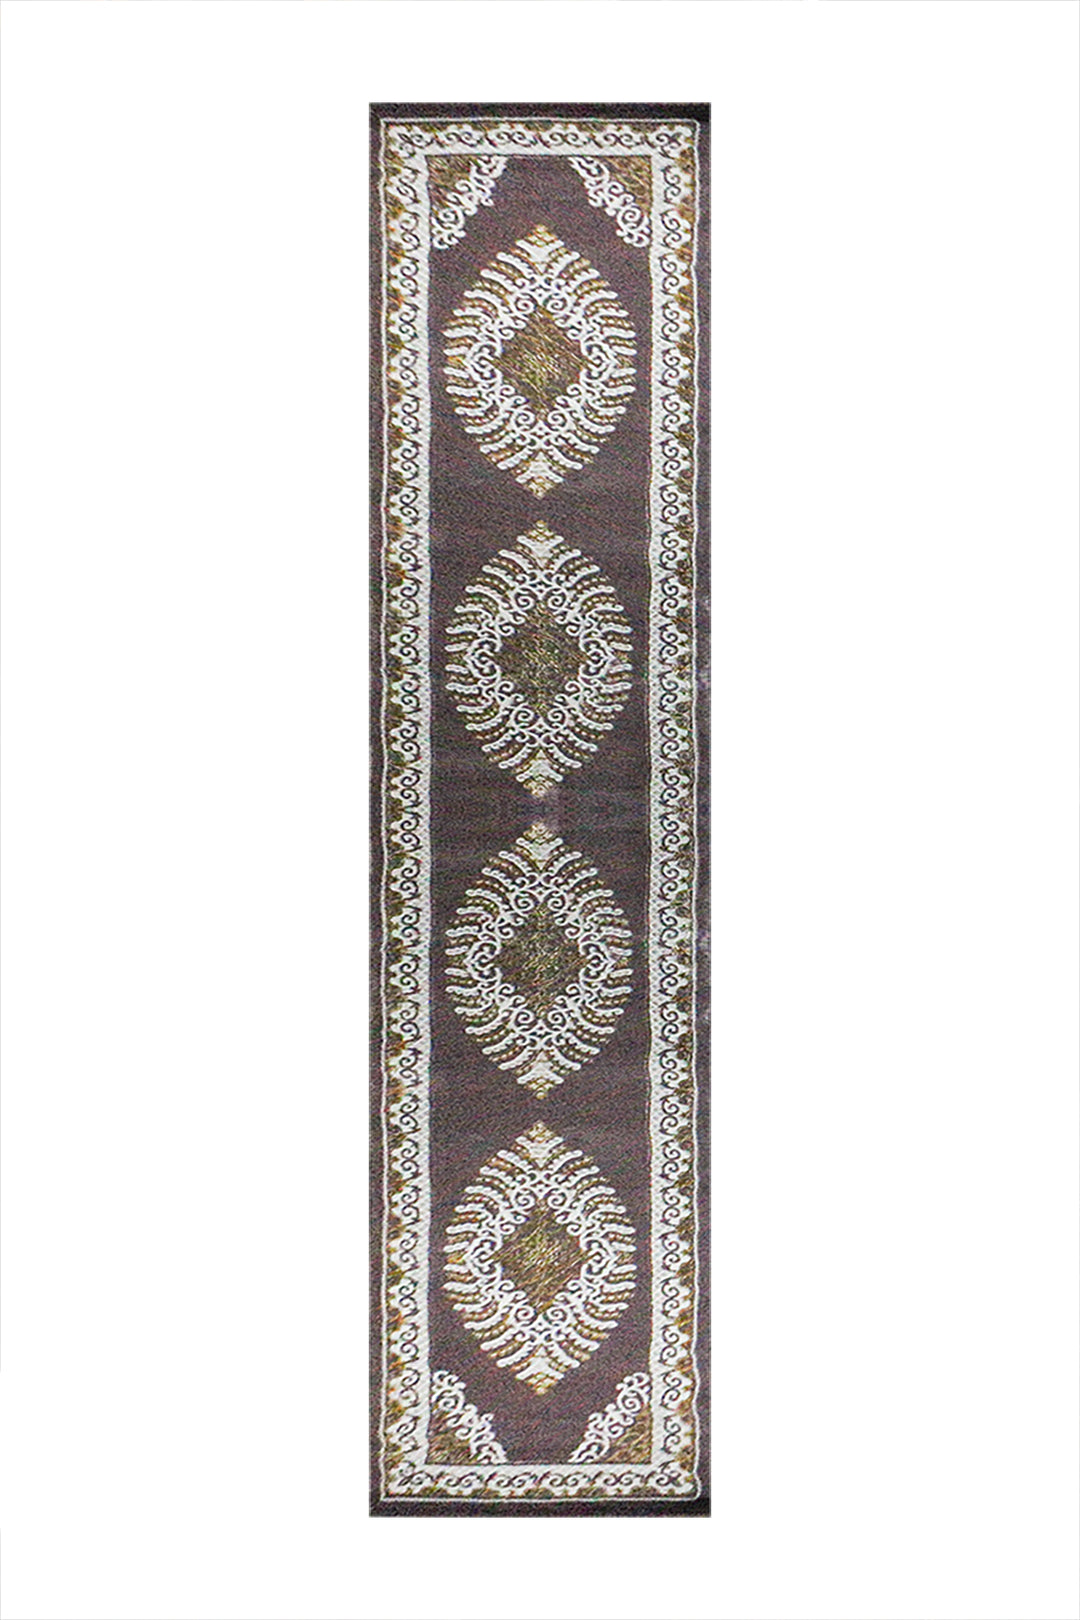 Turkish Modern Festival Wd Rug - Brown and Cream - 3.2 x 13.2 FT - Sleek and Minimalist for Chic Interiors